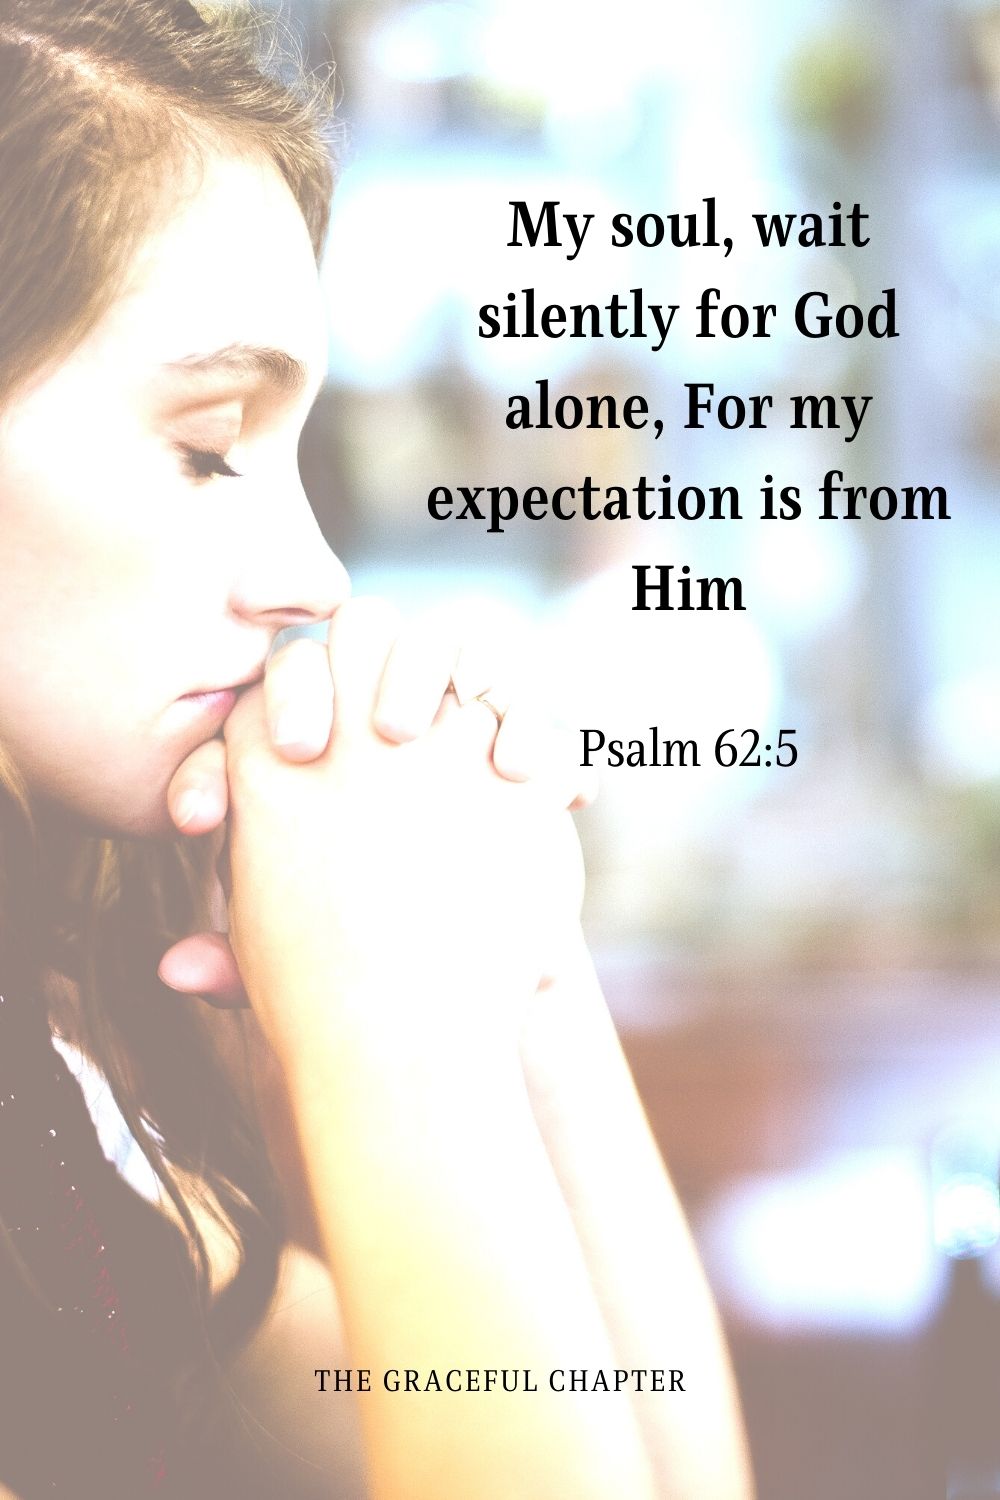 My soul, wait silently for God alone, For my expectation is from Him.